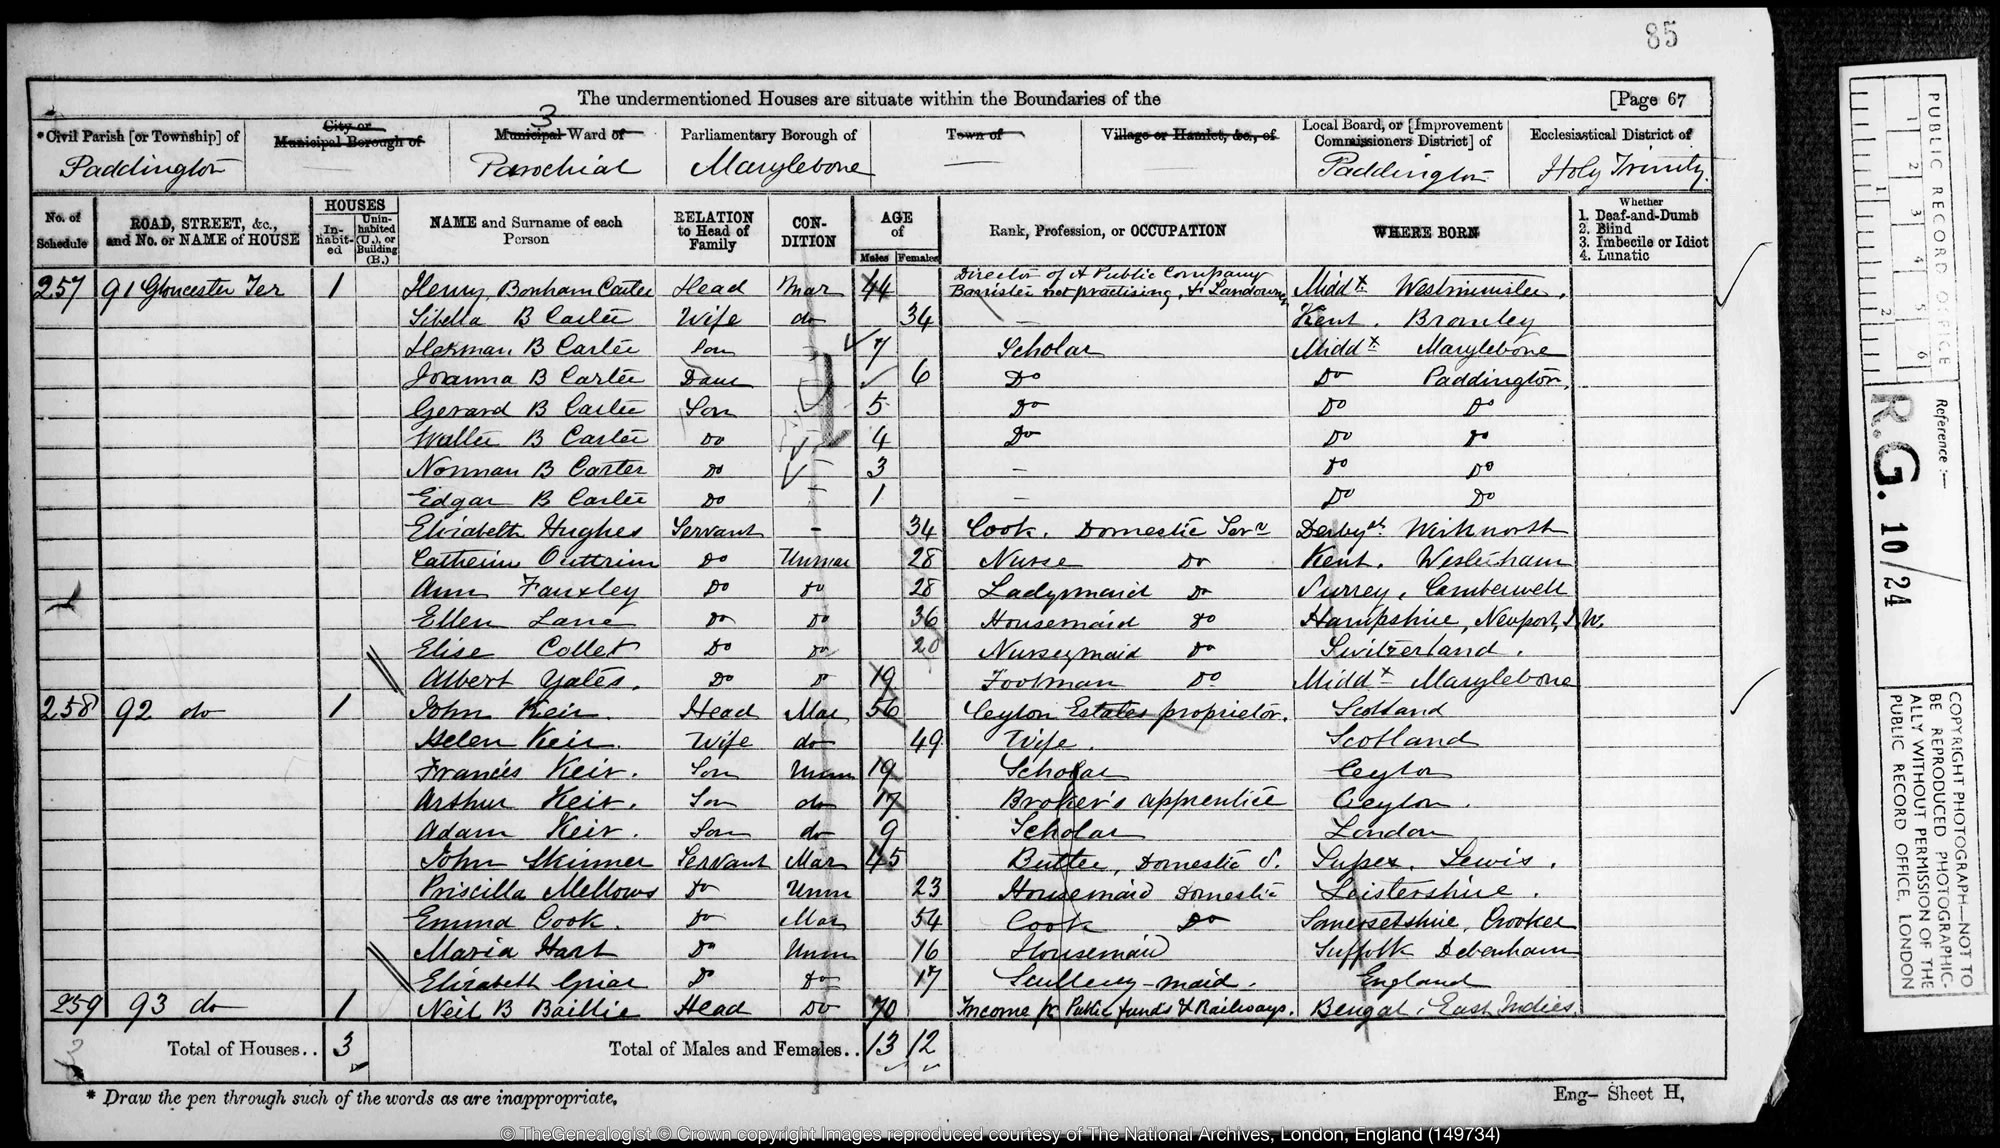 1871 census Henry Bonham Carter with his wife and family in Paddington